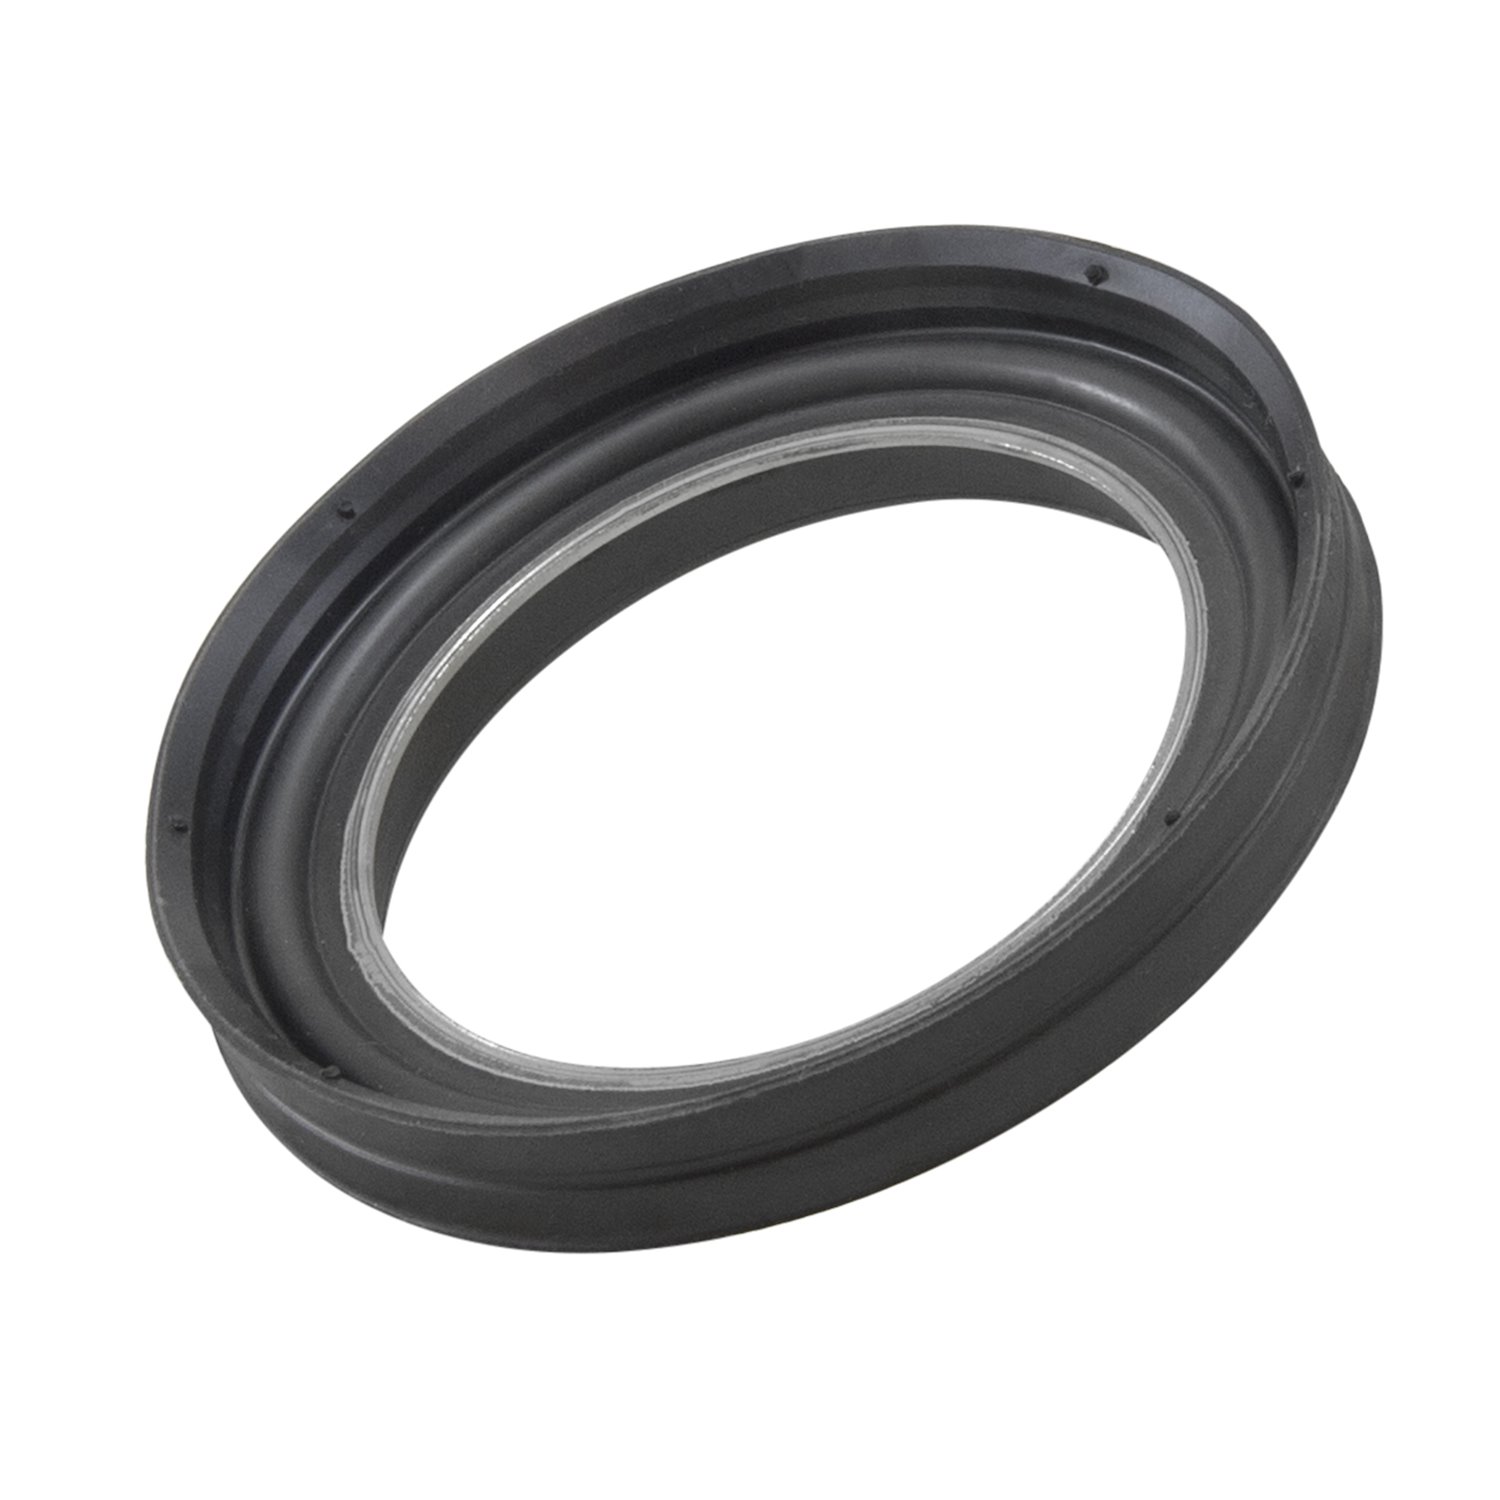 Replacement Axle Tube Seal For Dana 60, 99